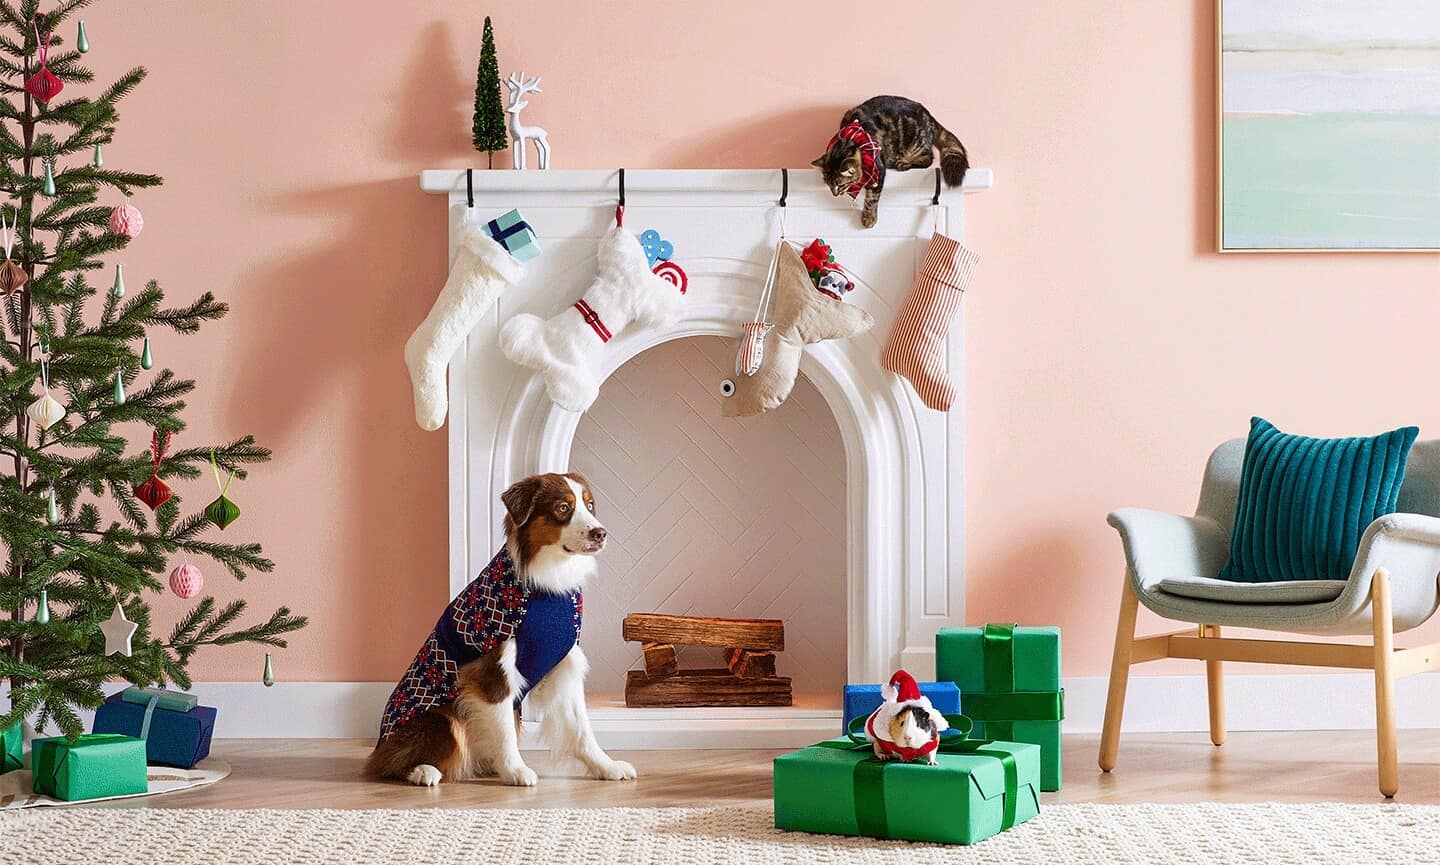 Pet Christmas Stockings That You Can Make (Fast and Easy!)